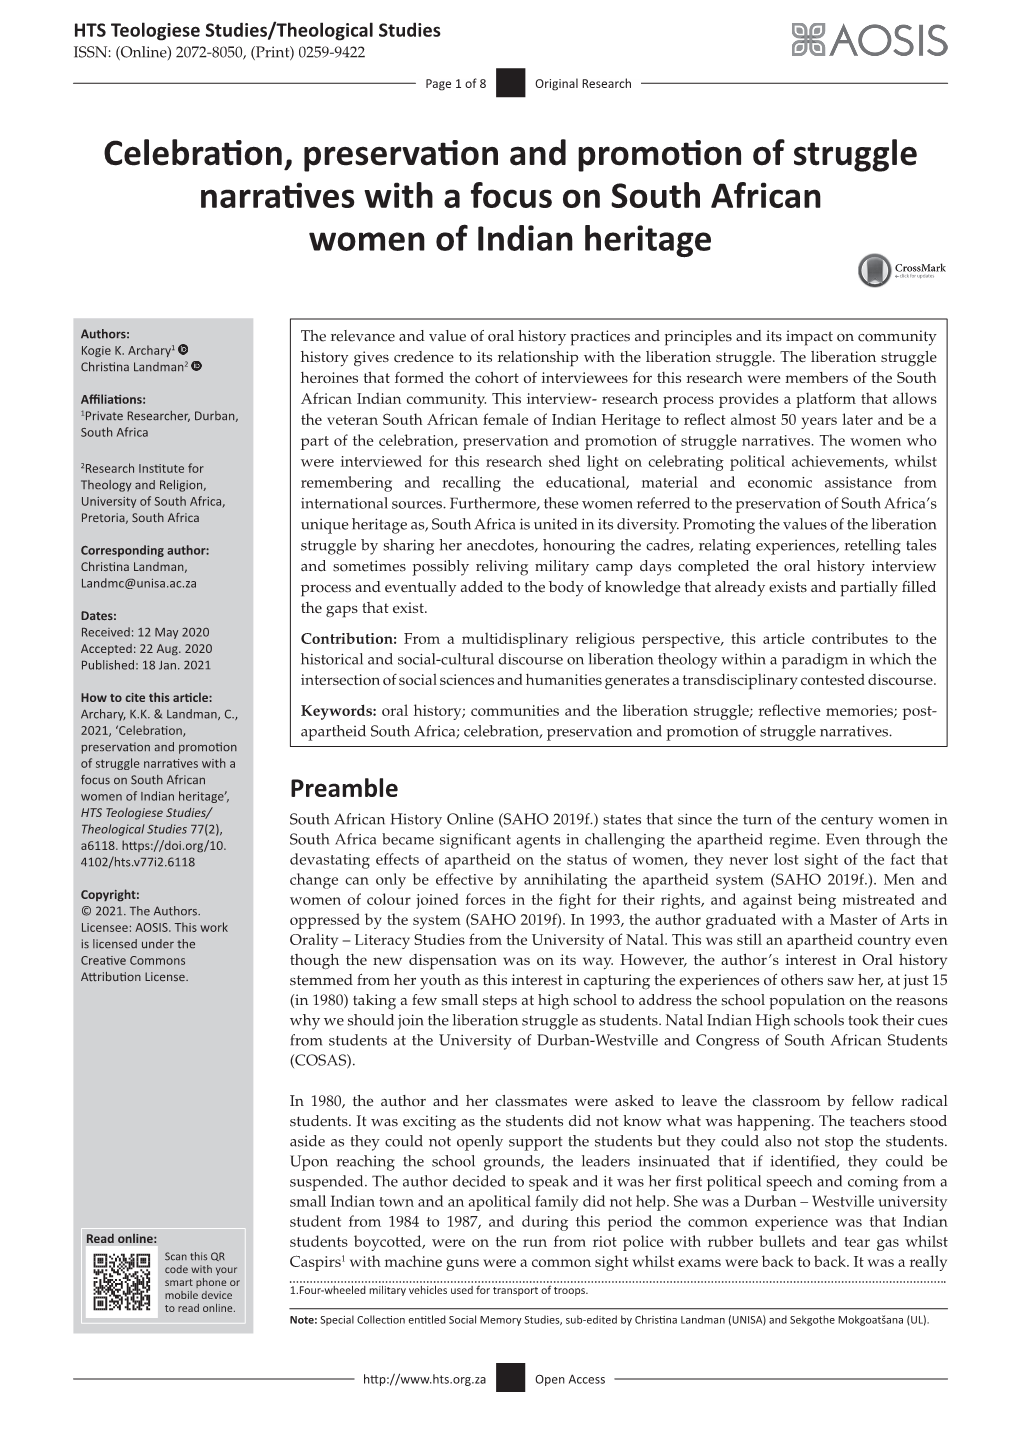 Celebration, Preservation and Promotion of Struggle Narratives with a Focus on South African Women of Indian Heritage